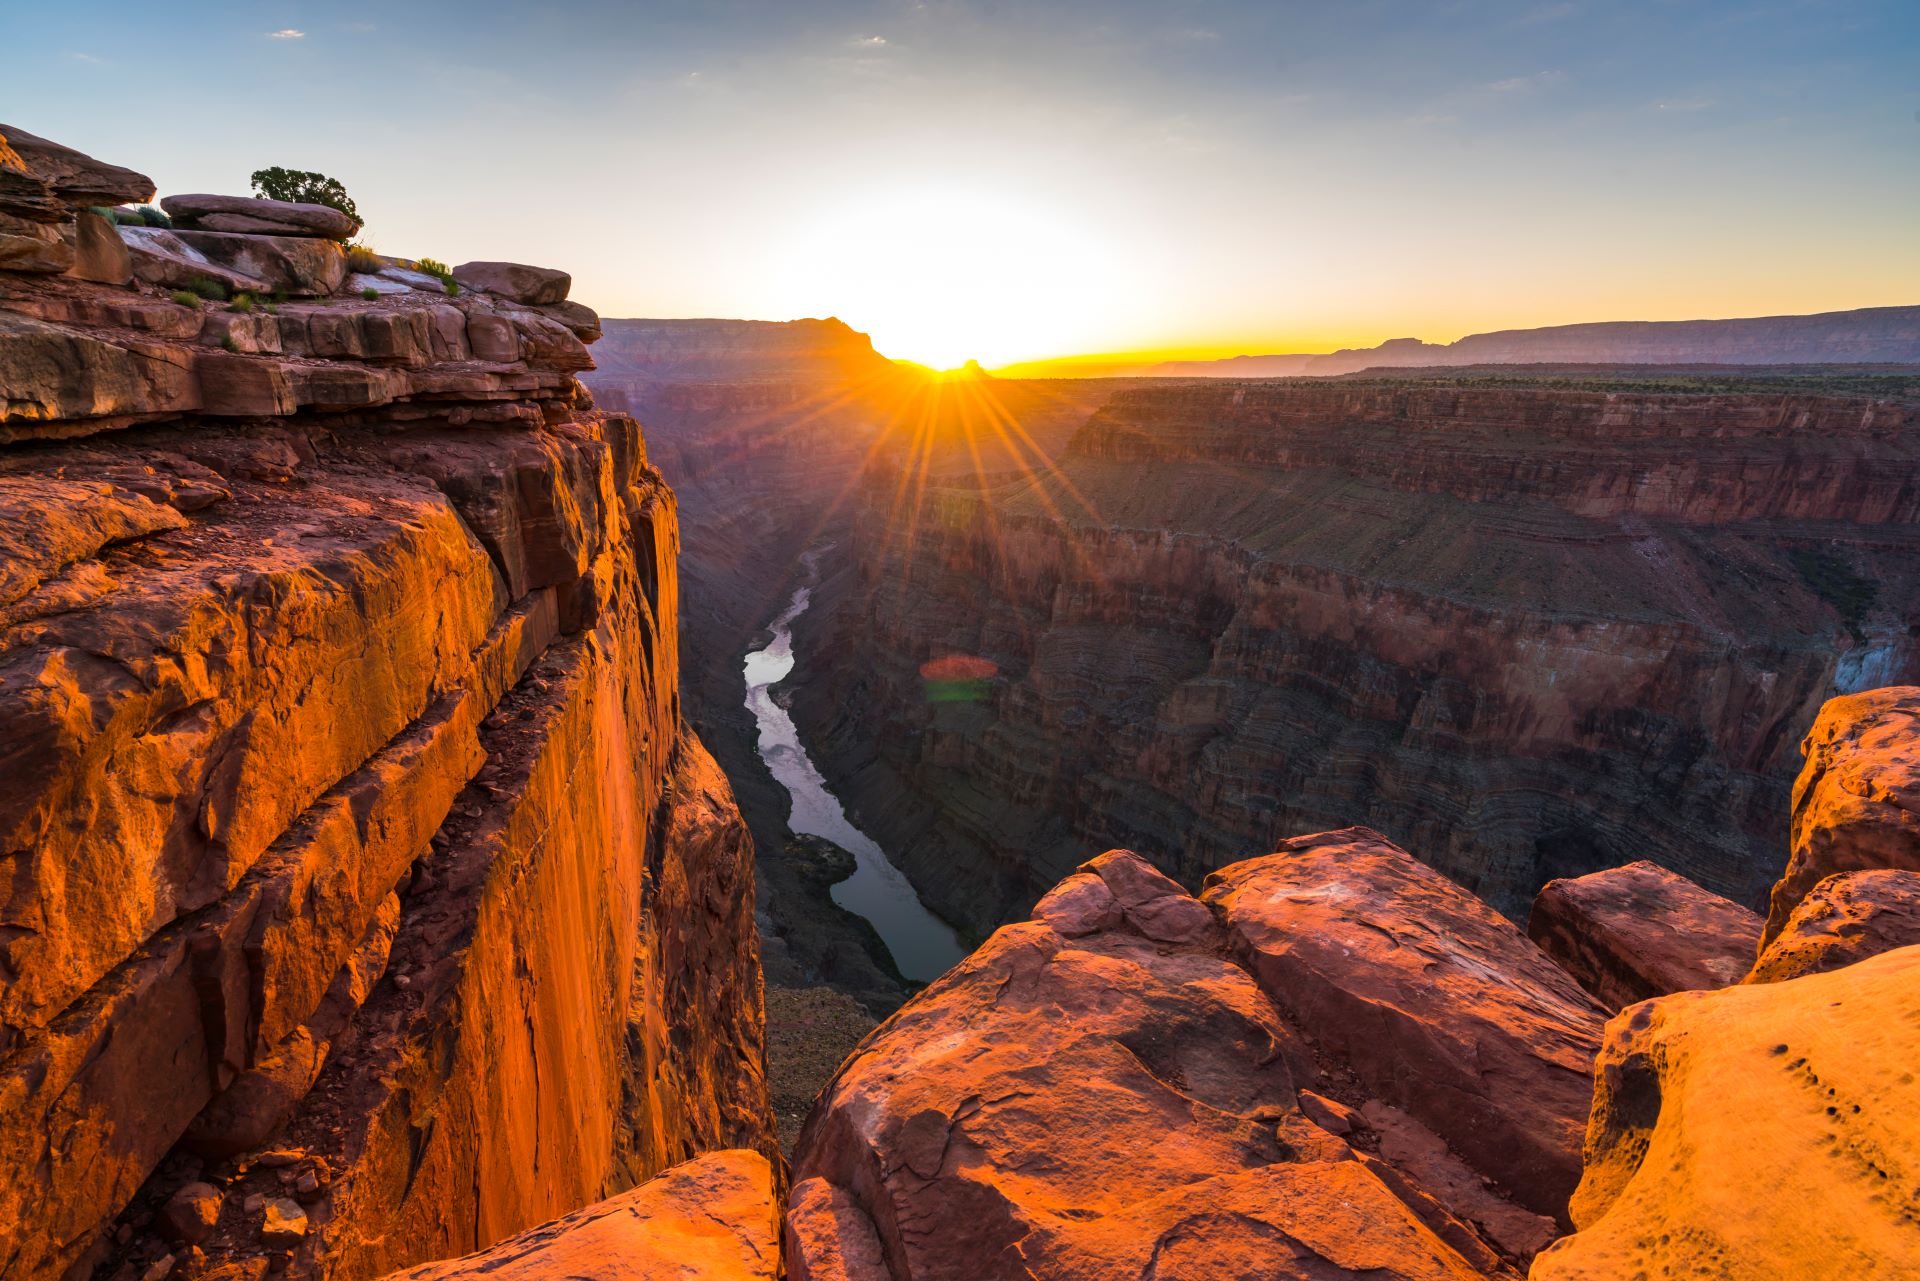 Sunset view of the grand canyon